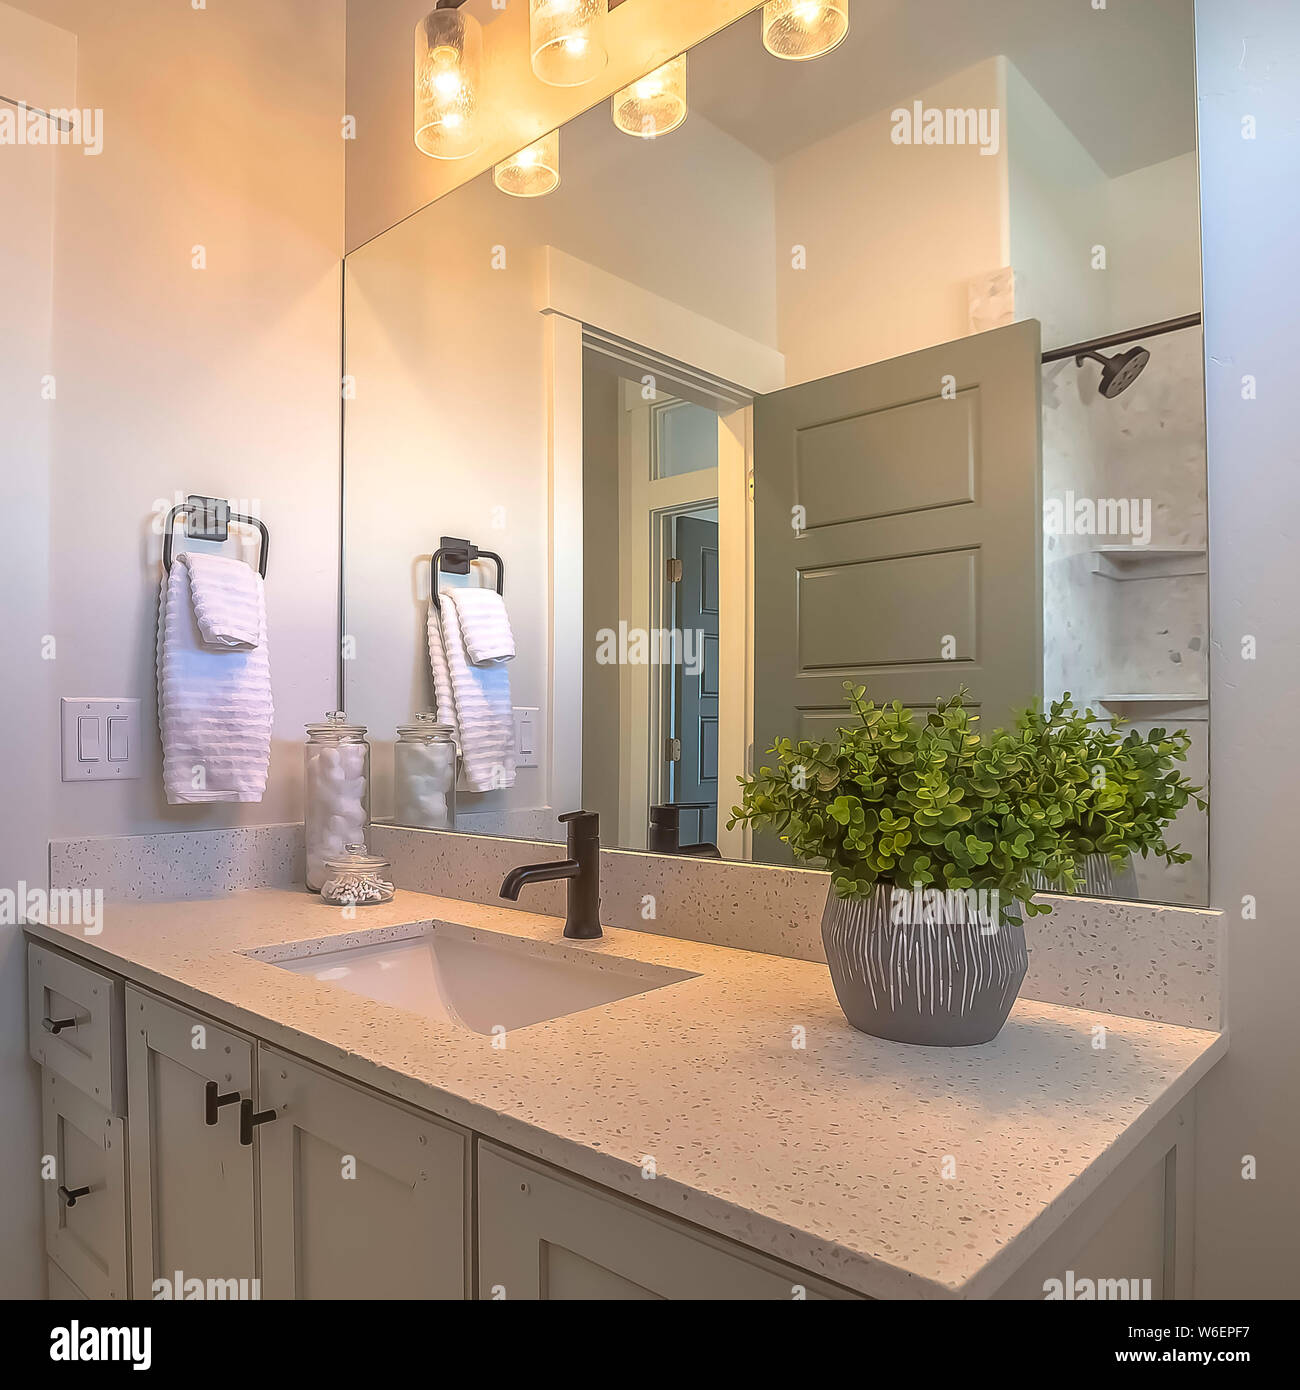 Square Mirror And Vanity Unit Inside A Bathroom With White Wall And Brown Wood Floor Stock Photo Alamy